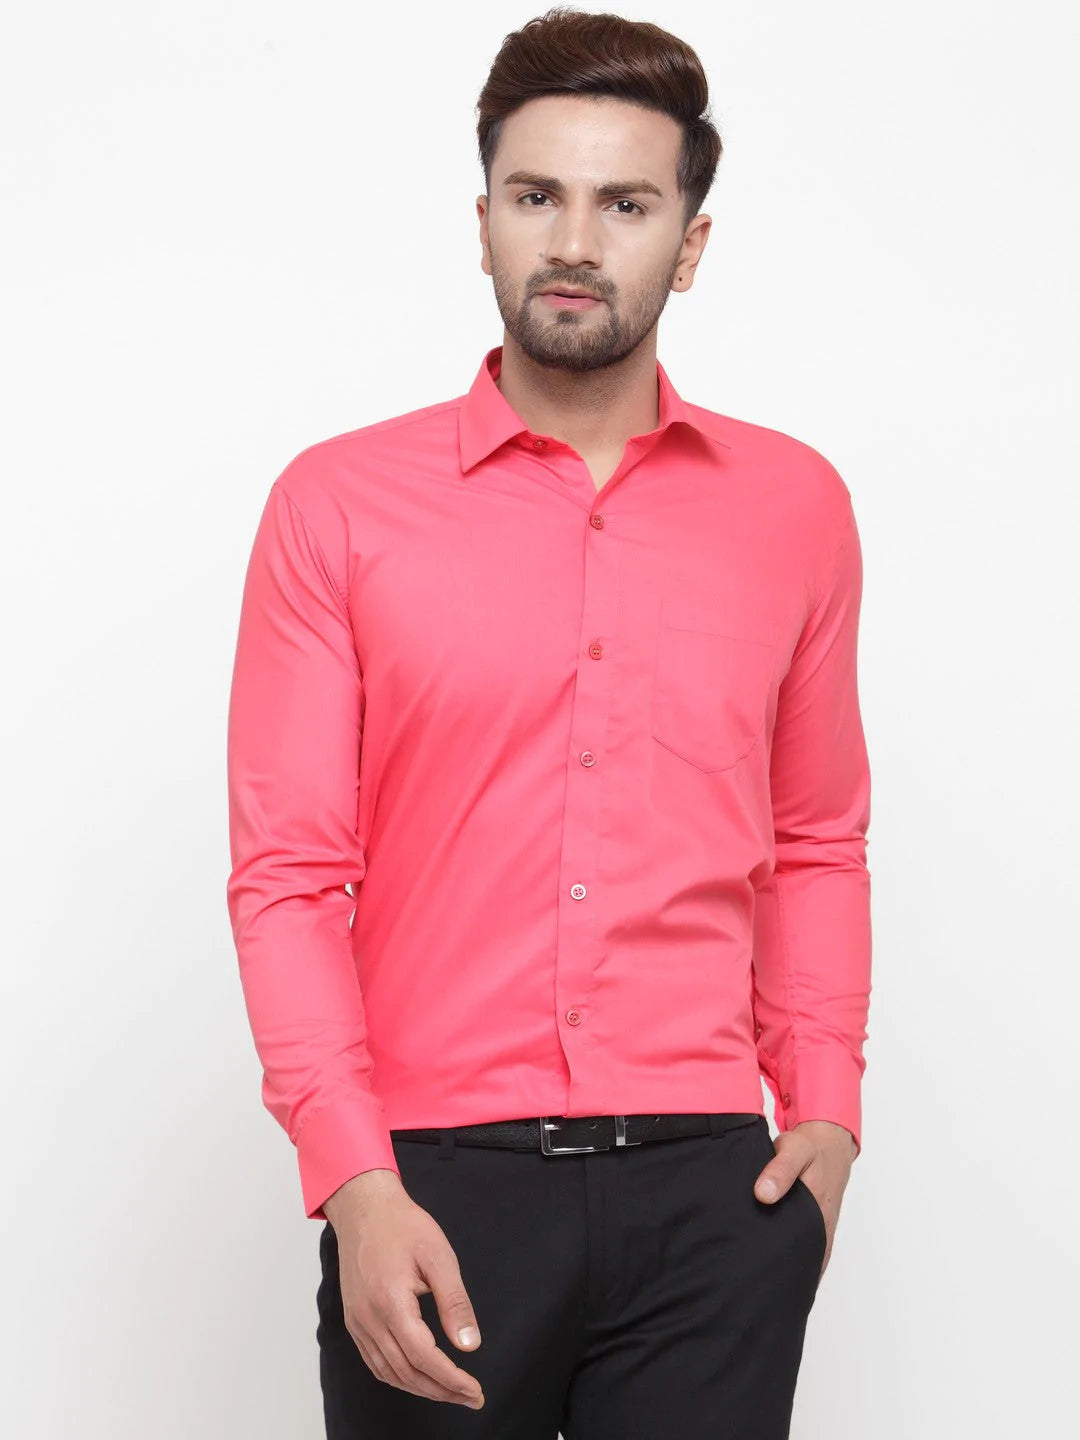 Jainish Men's Cotton Solid Coral Red Formal Shirt's ( SF 361Coral )